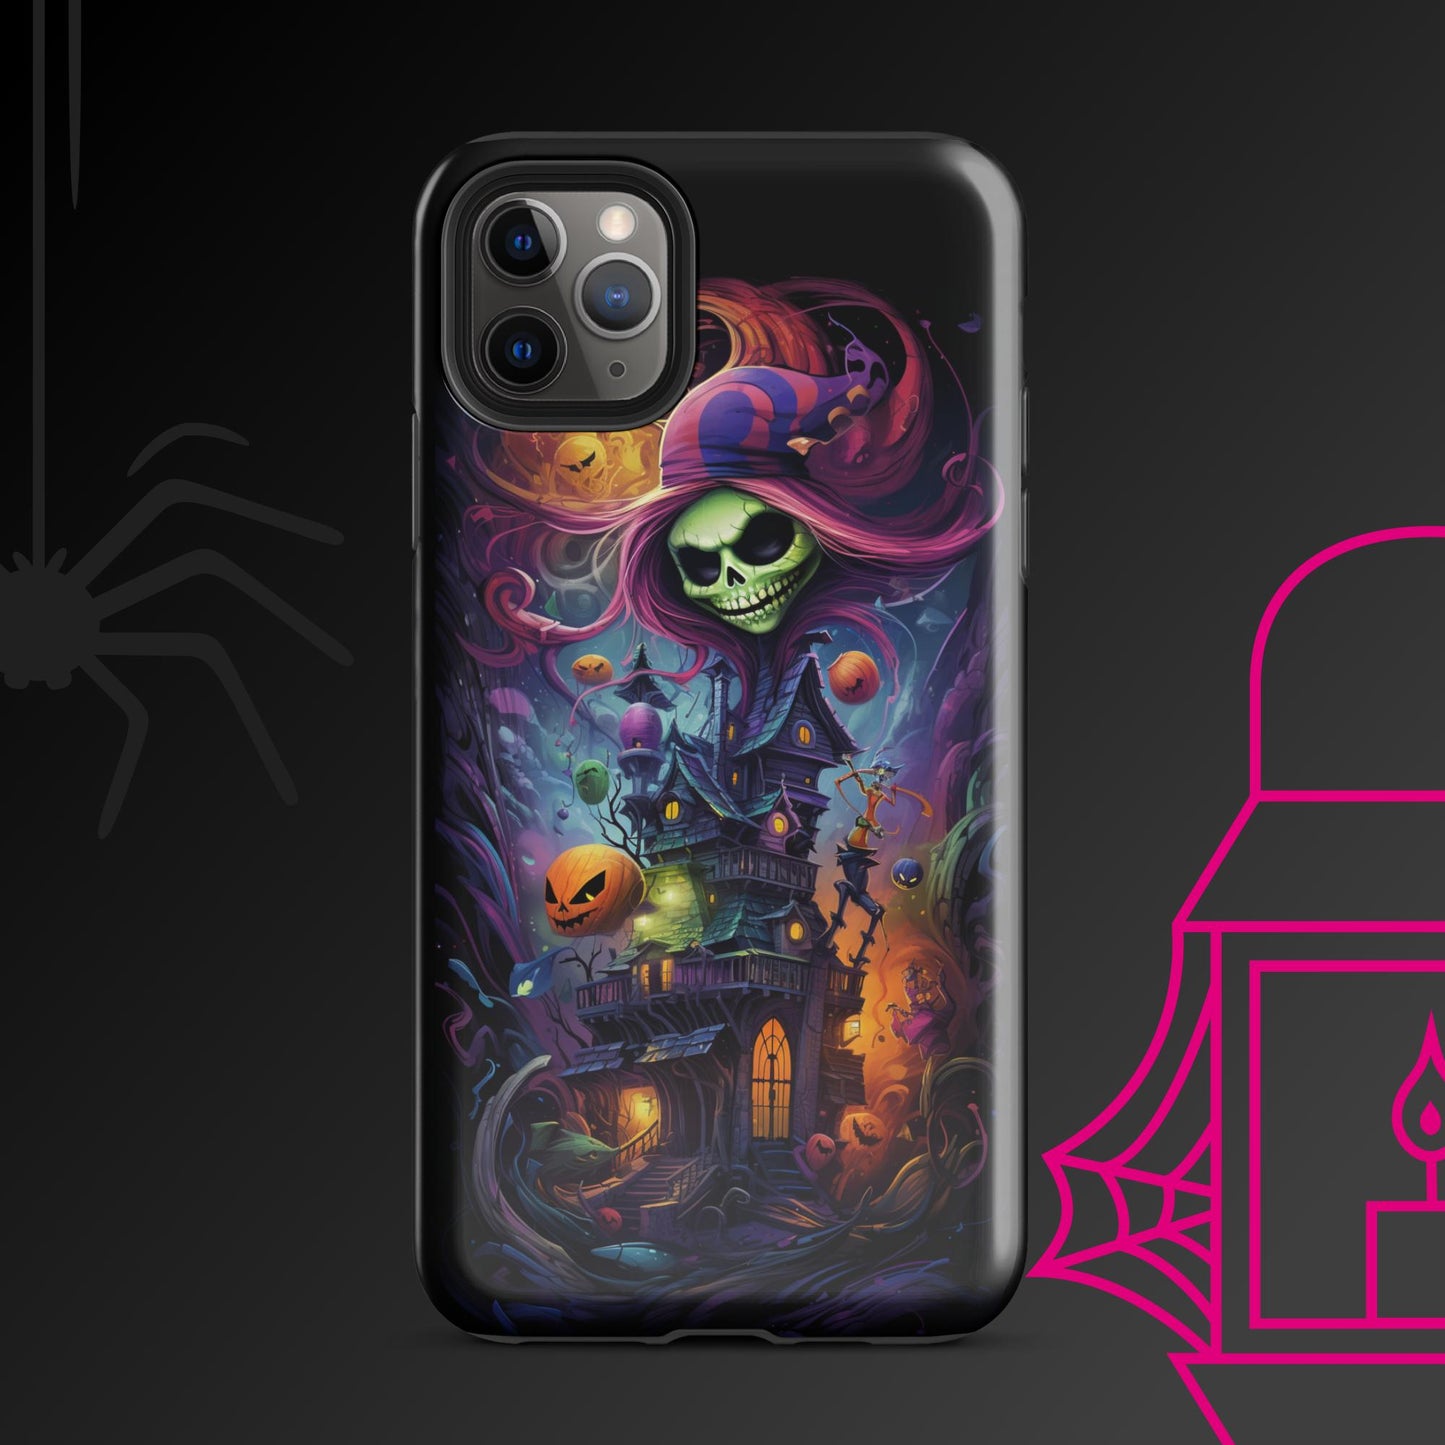 Haunted House Party Tough Case, Shockproof Phone Case,Cool Designed Phone Cases, Pocket-friendly